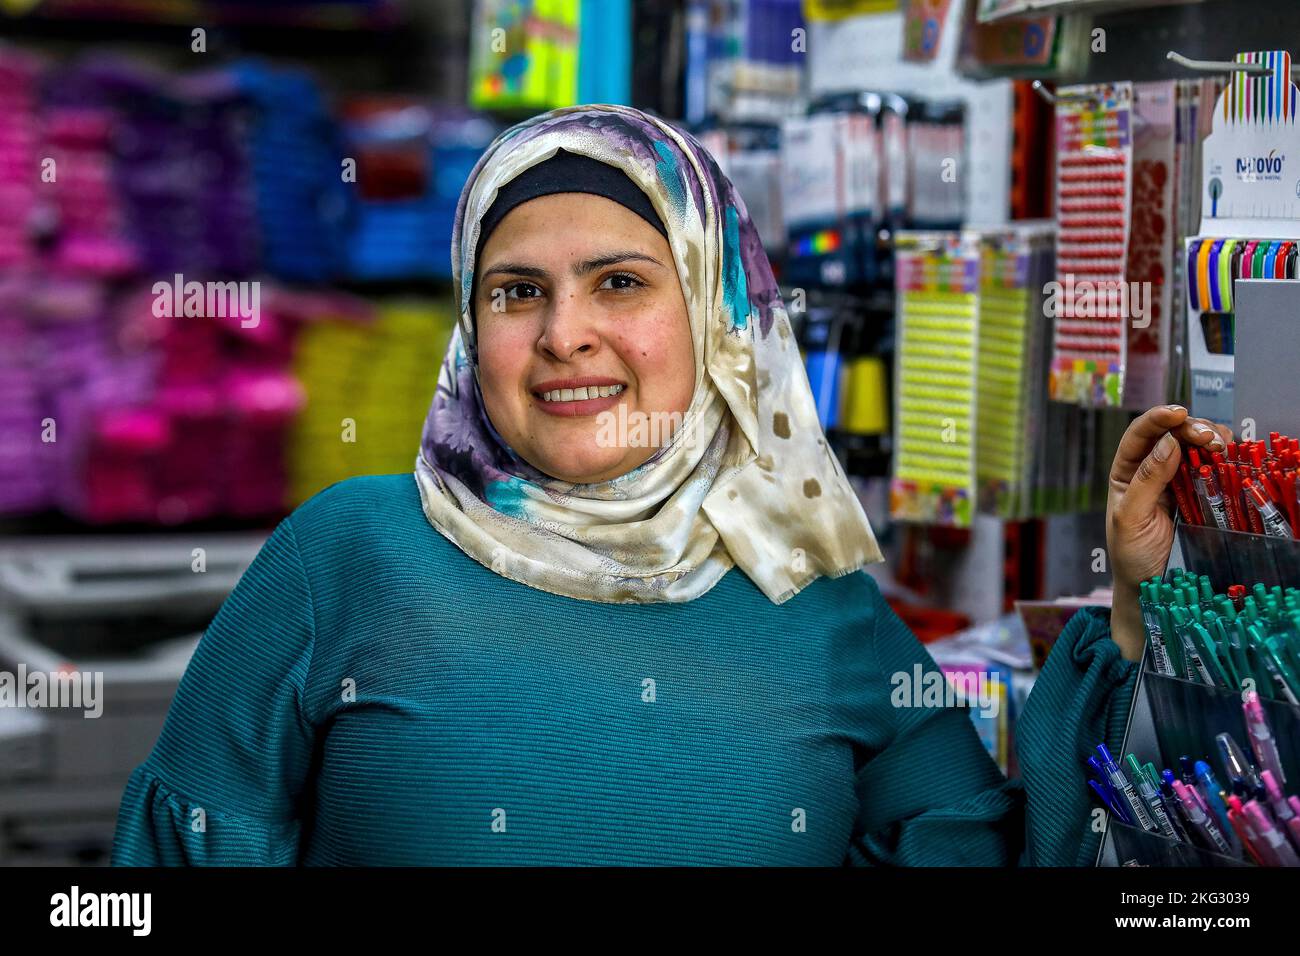 Shopkeeper and client of a microfinance institution in Beirut, Lebanon Stock Photo